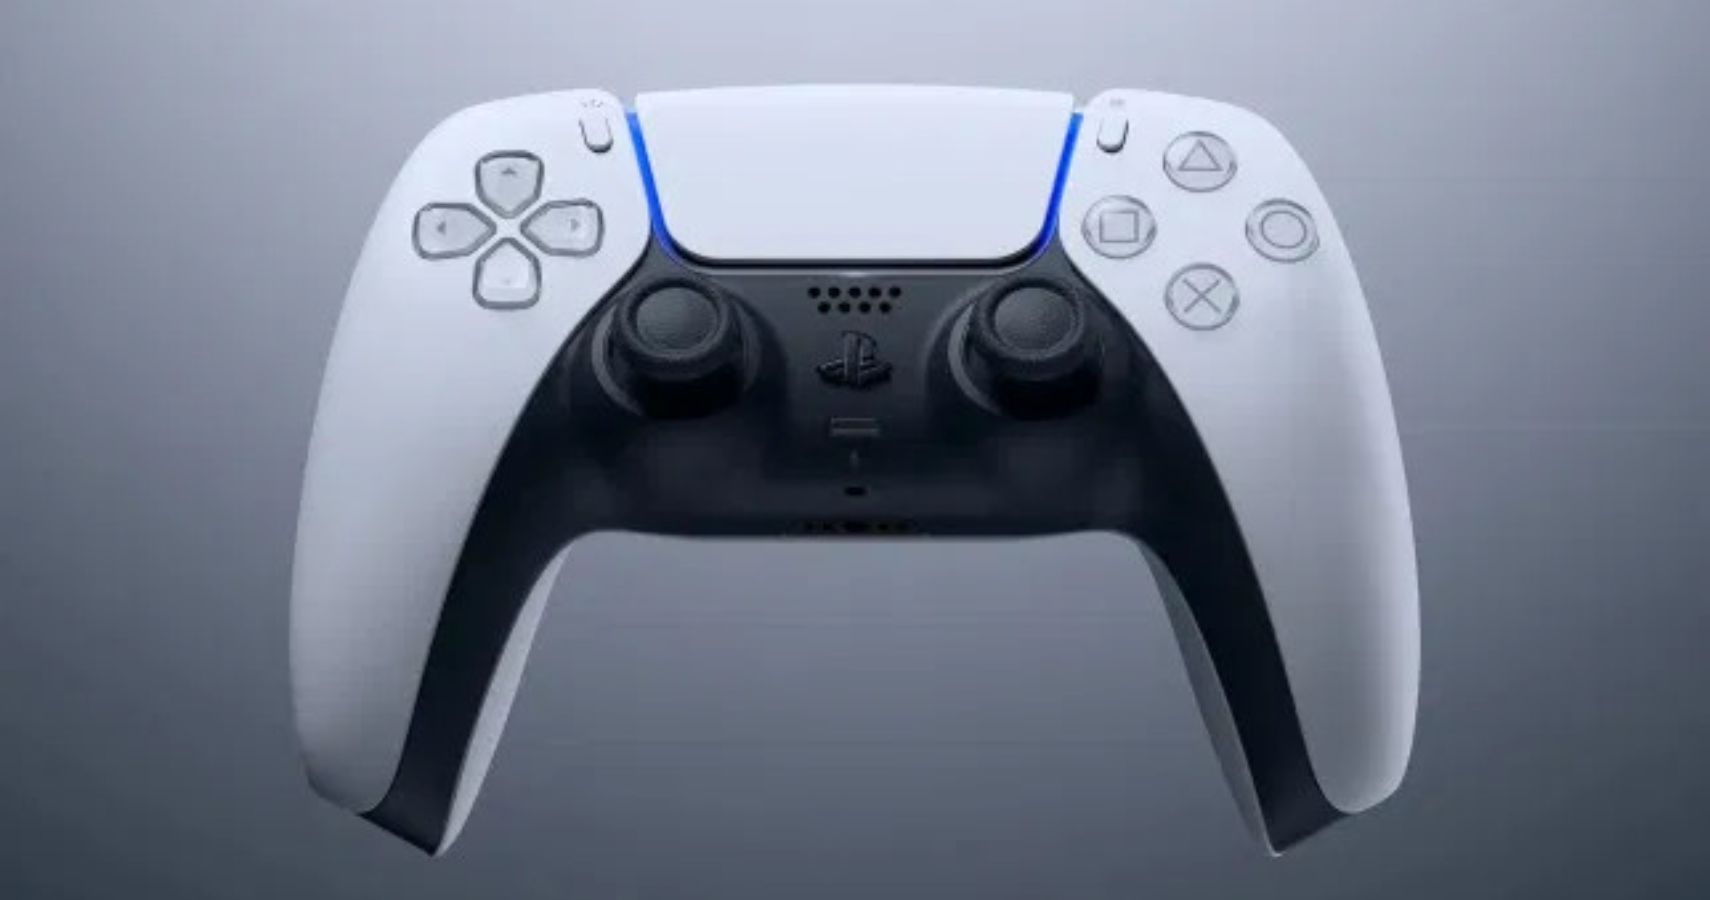 Phil Spencer Applauds Sonys Innovation With The PS5 Controller